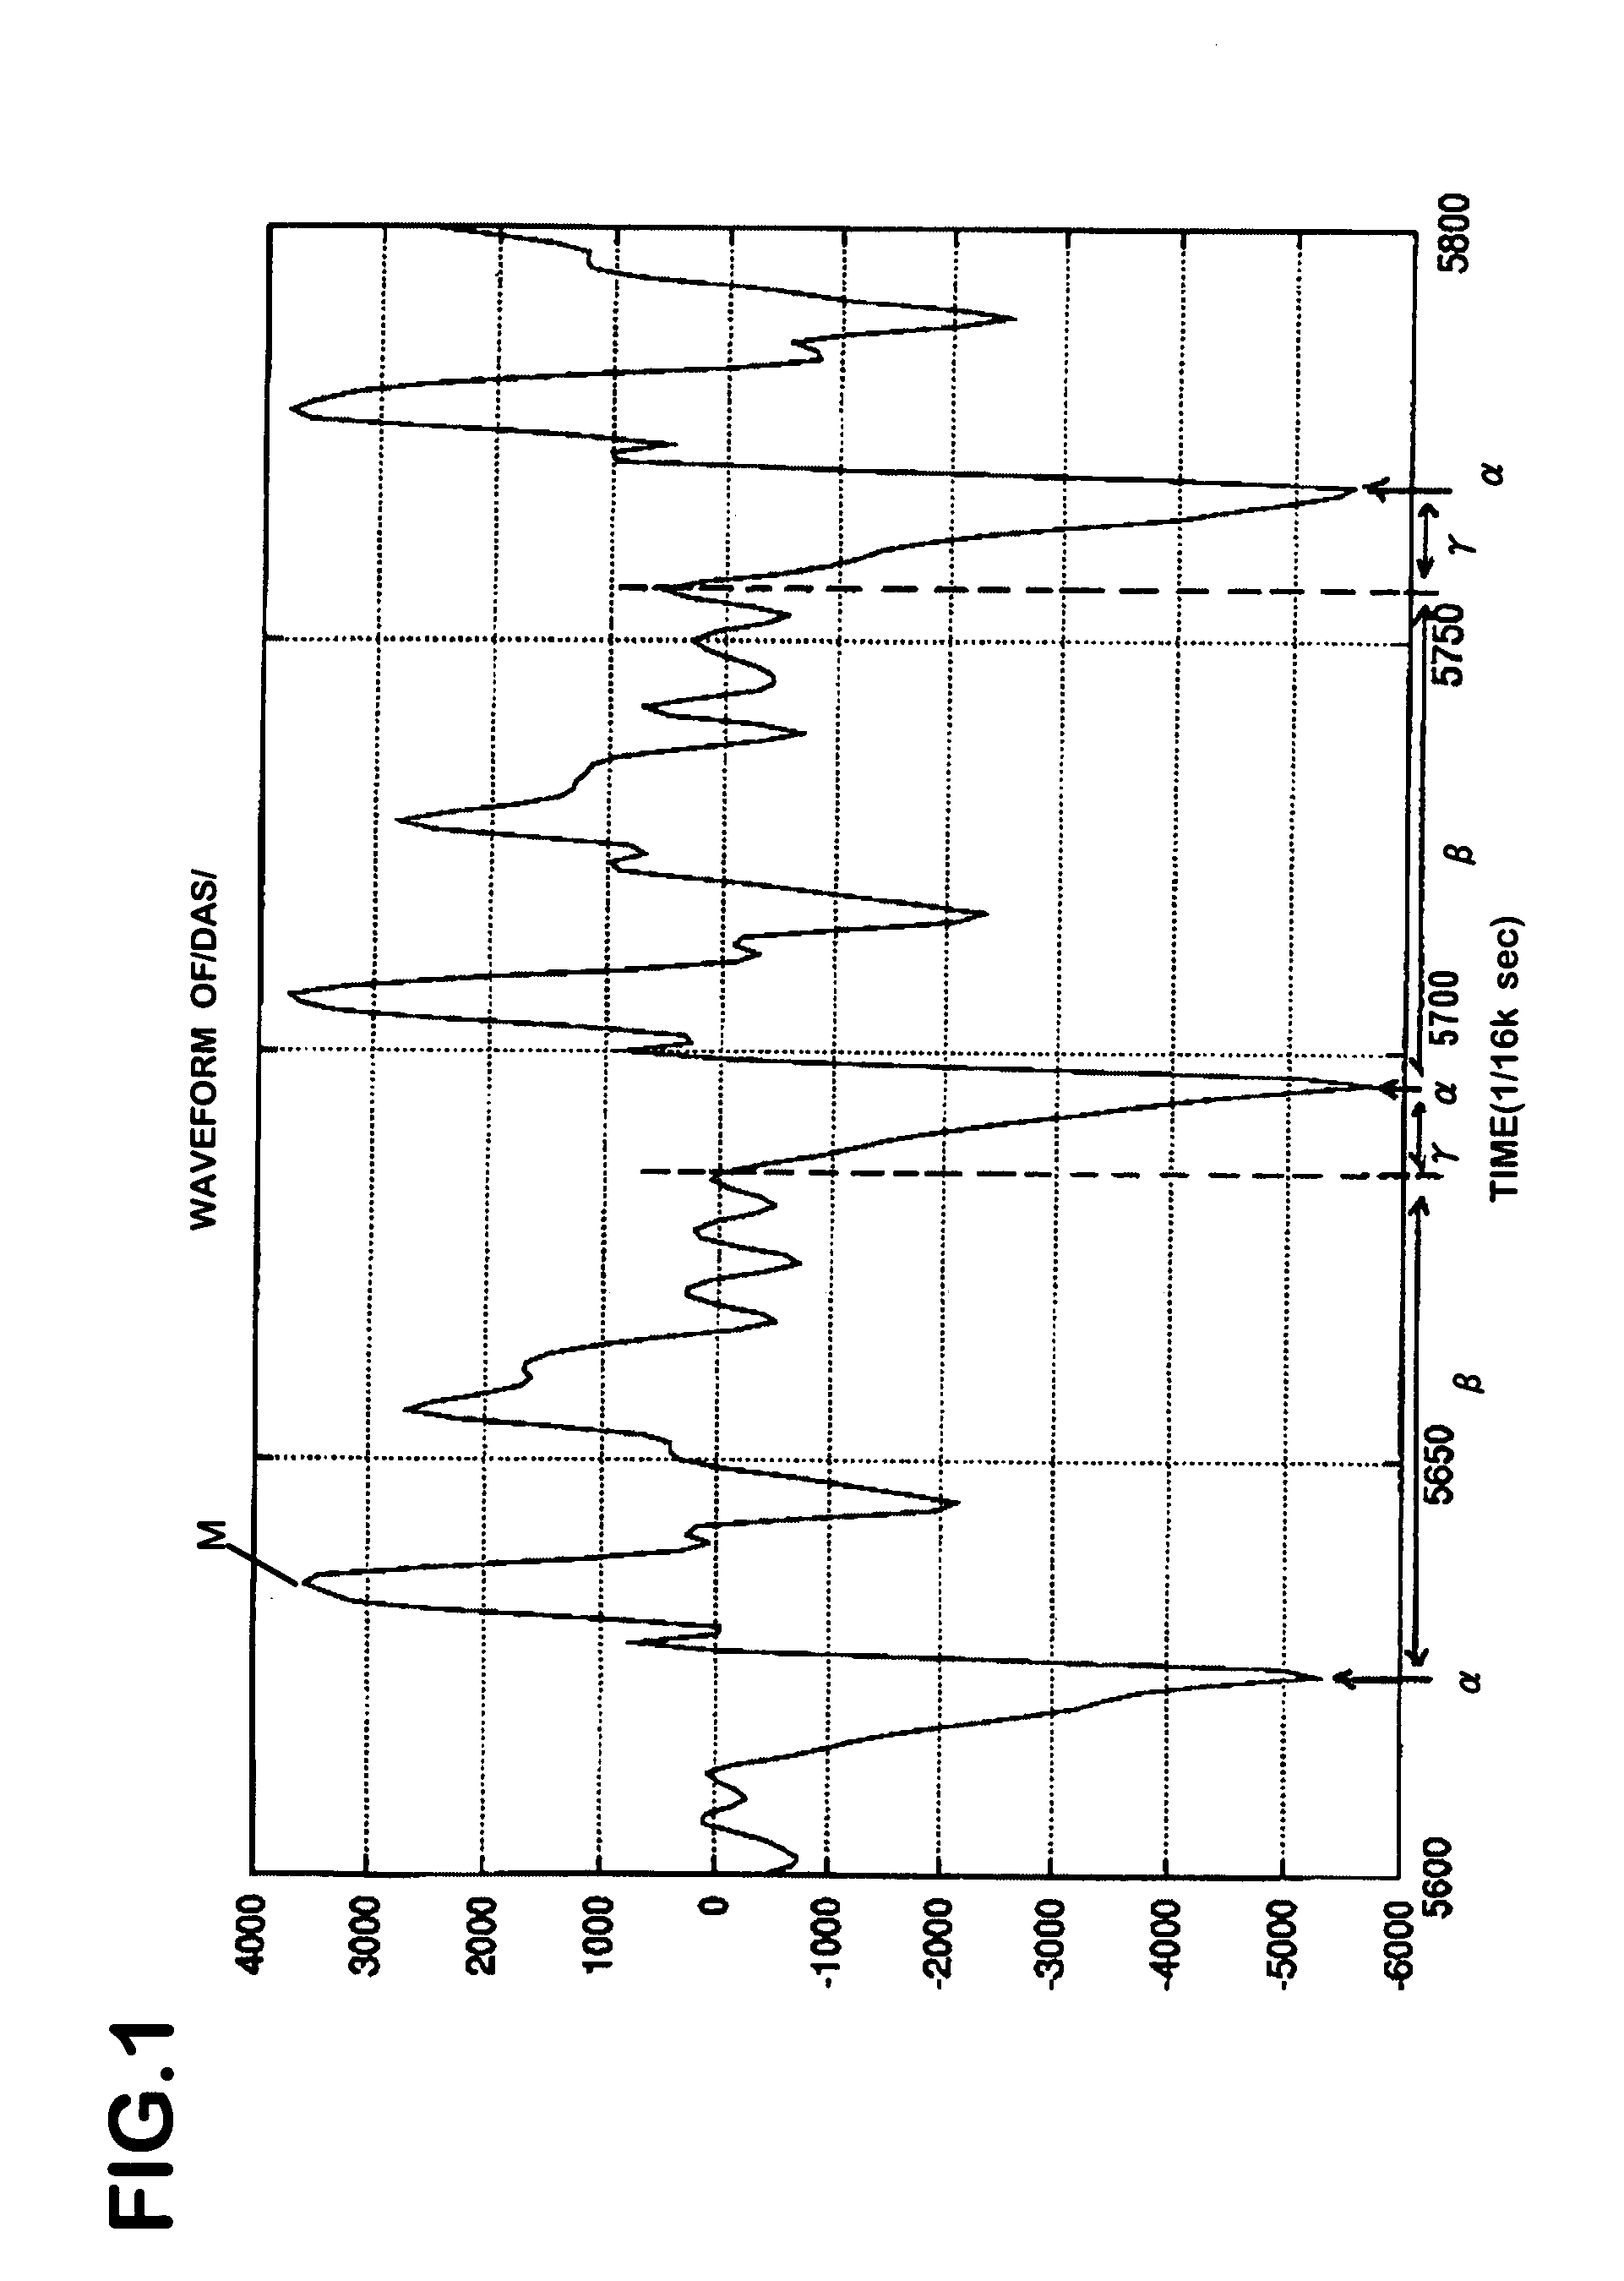 Device and method for synthesizing speech